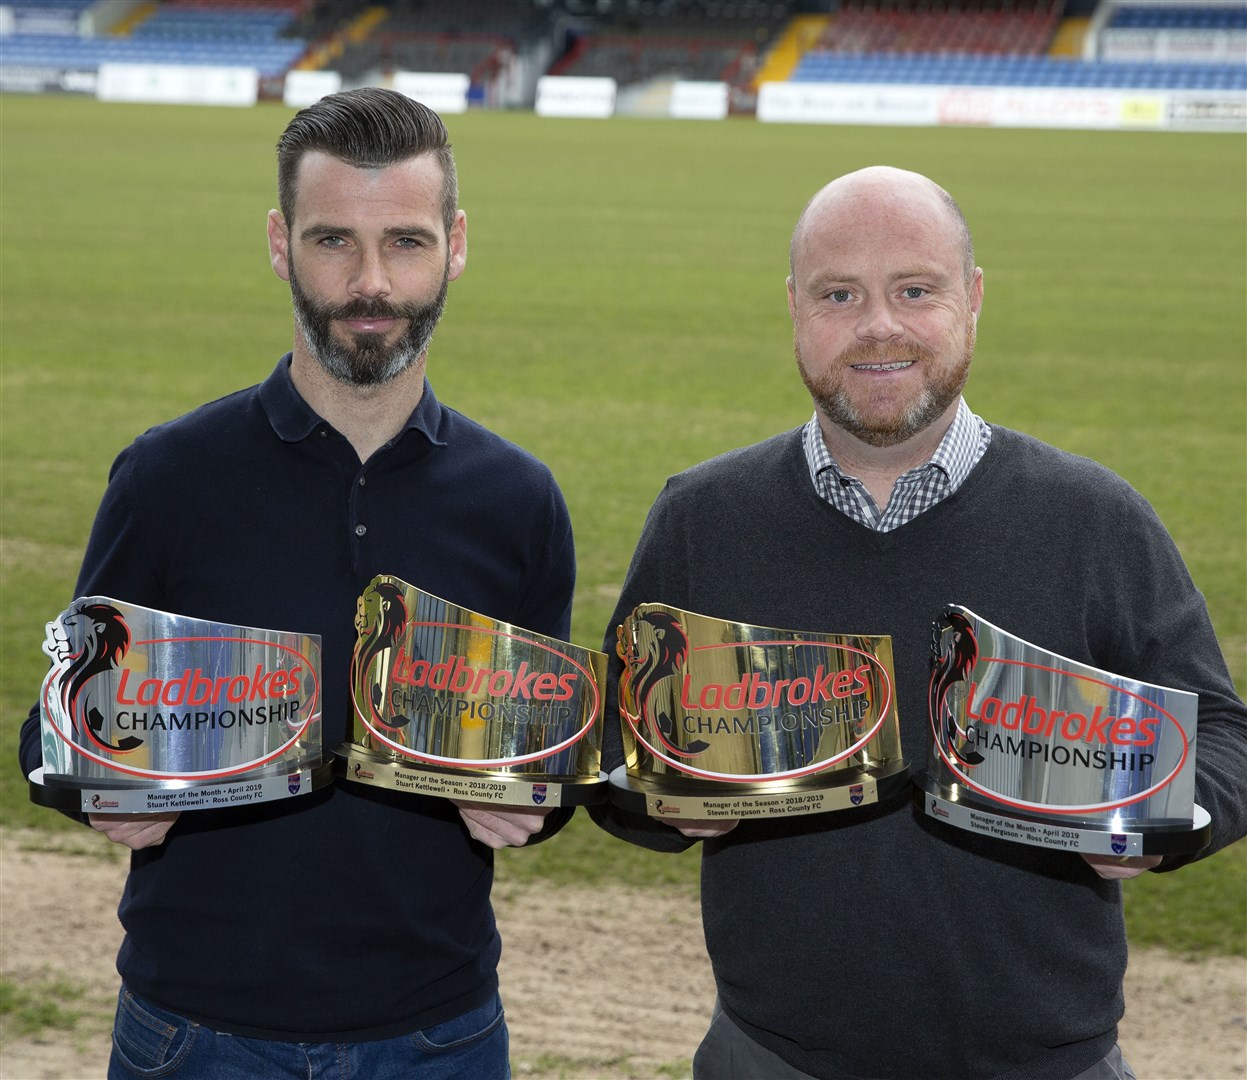 Ross County co-managers Stuart Kettlewell and Steven Ferguson pictured with their Ladbrokes Championship Manager of the Season, as well as their Championship Manager of the Month award for April.